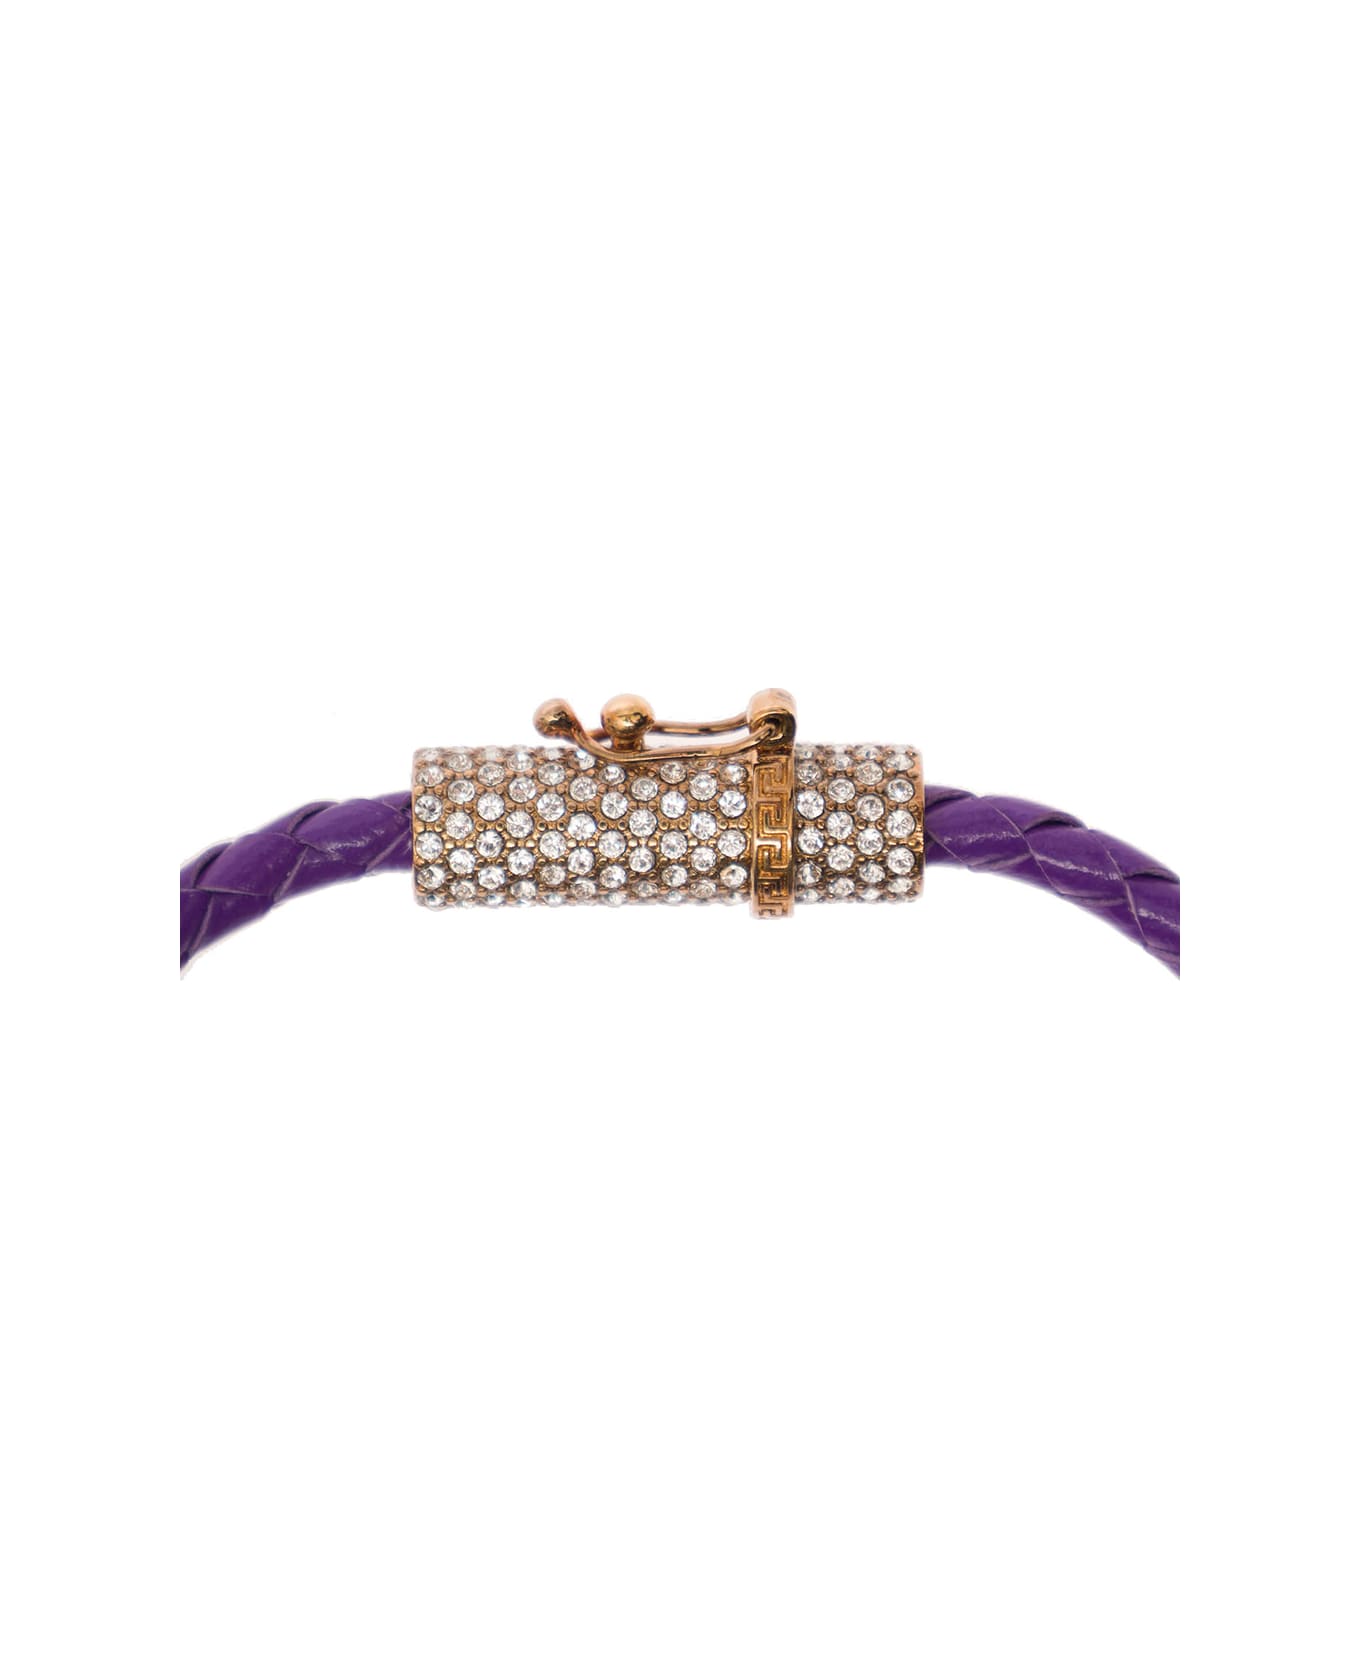 Versace Medusa Plaque Detail Bracelt In Gold-tone Brass And Purple Leather Woman - Violet ブレスレット